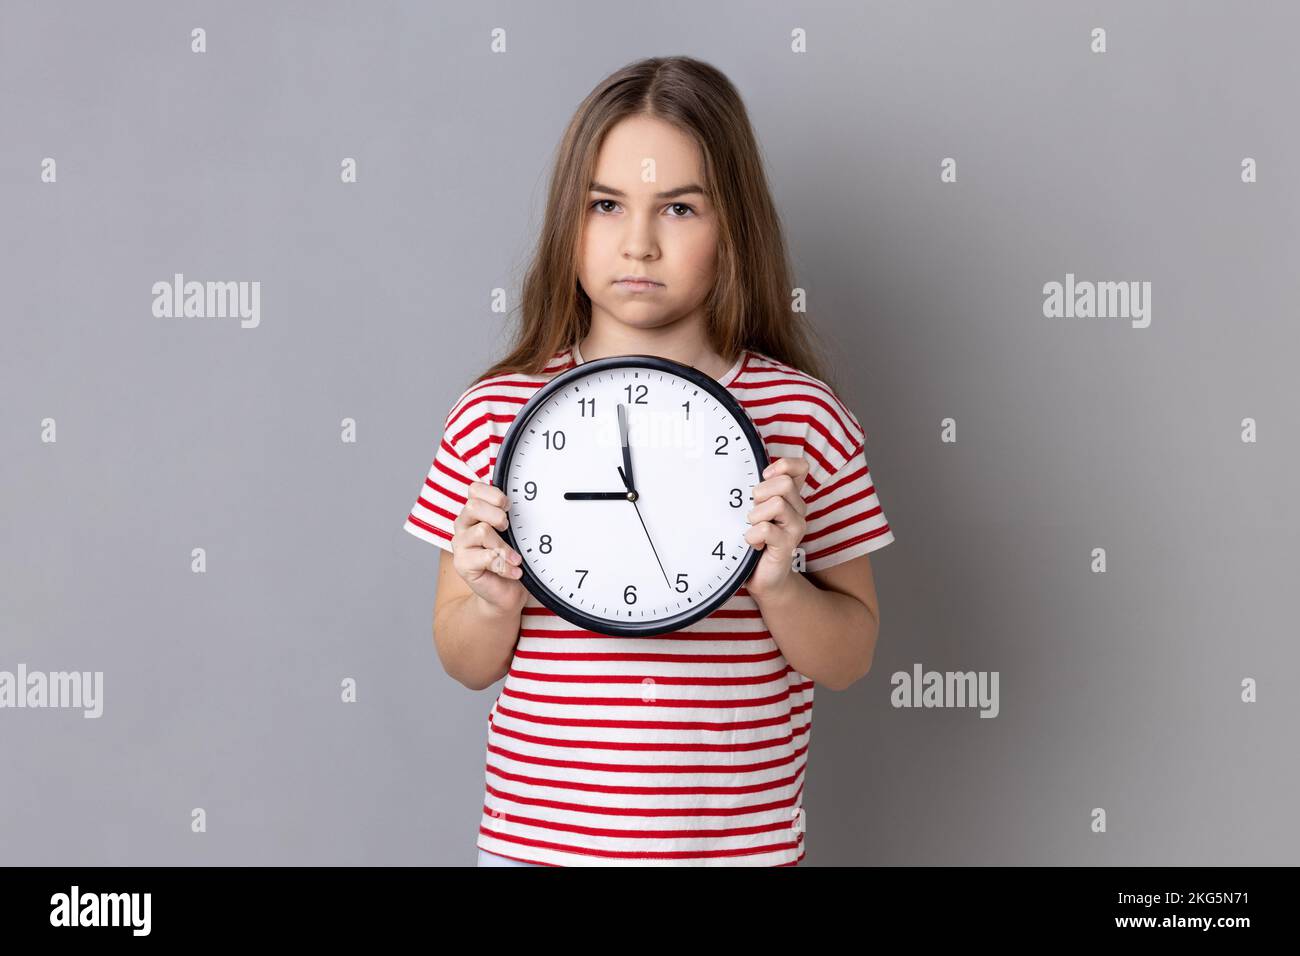 Portrait of serious little girl wearing striped T-shirt holding big wall clock, looking at camera with unpleasant emotions, time to go. Indoor studio shot isolated on gray background. Stock Photo